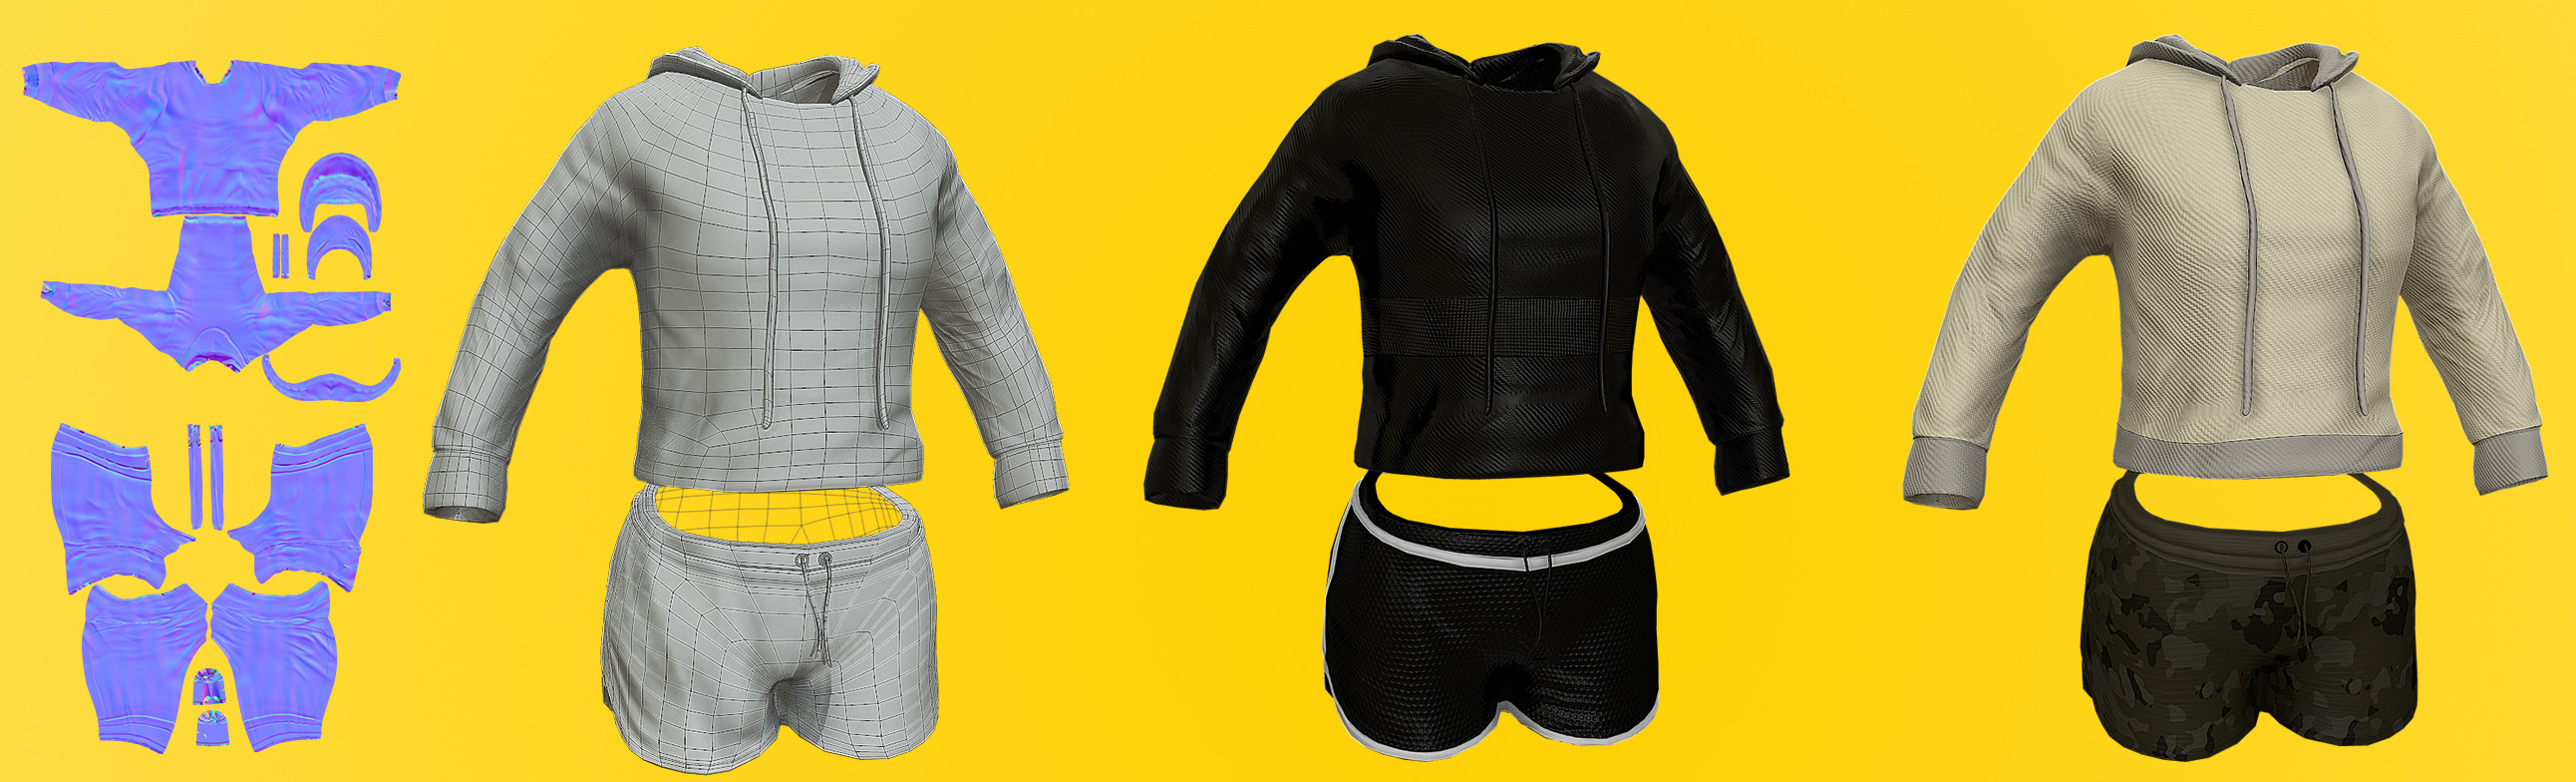 Modeled clothing and uvs of outfit and others. Two clothing textures to the right were done by Mark Lopez. 